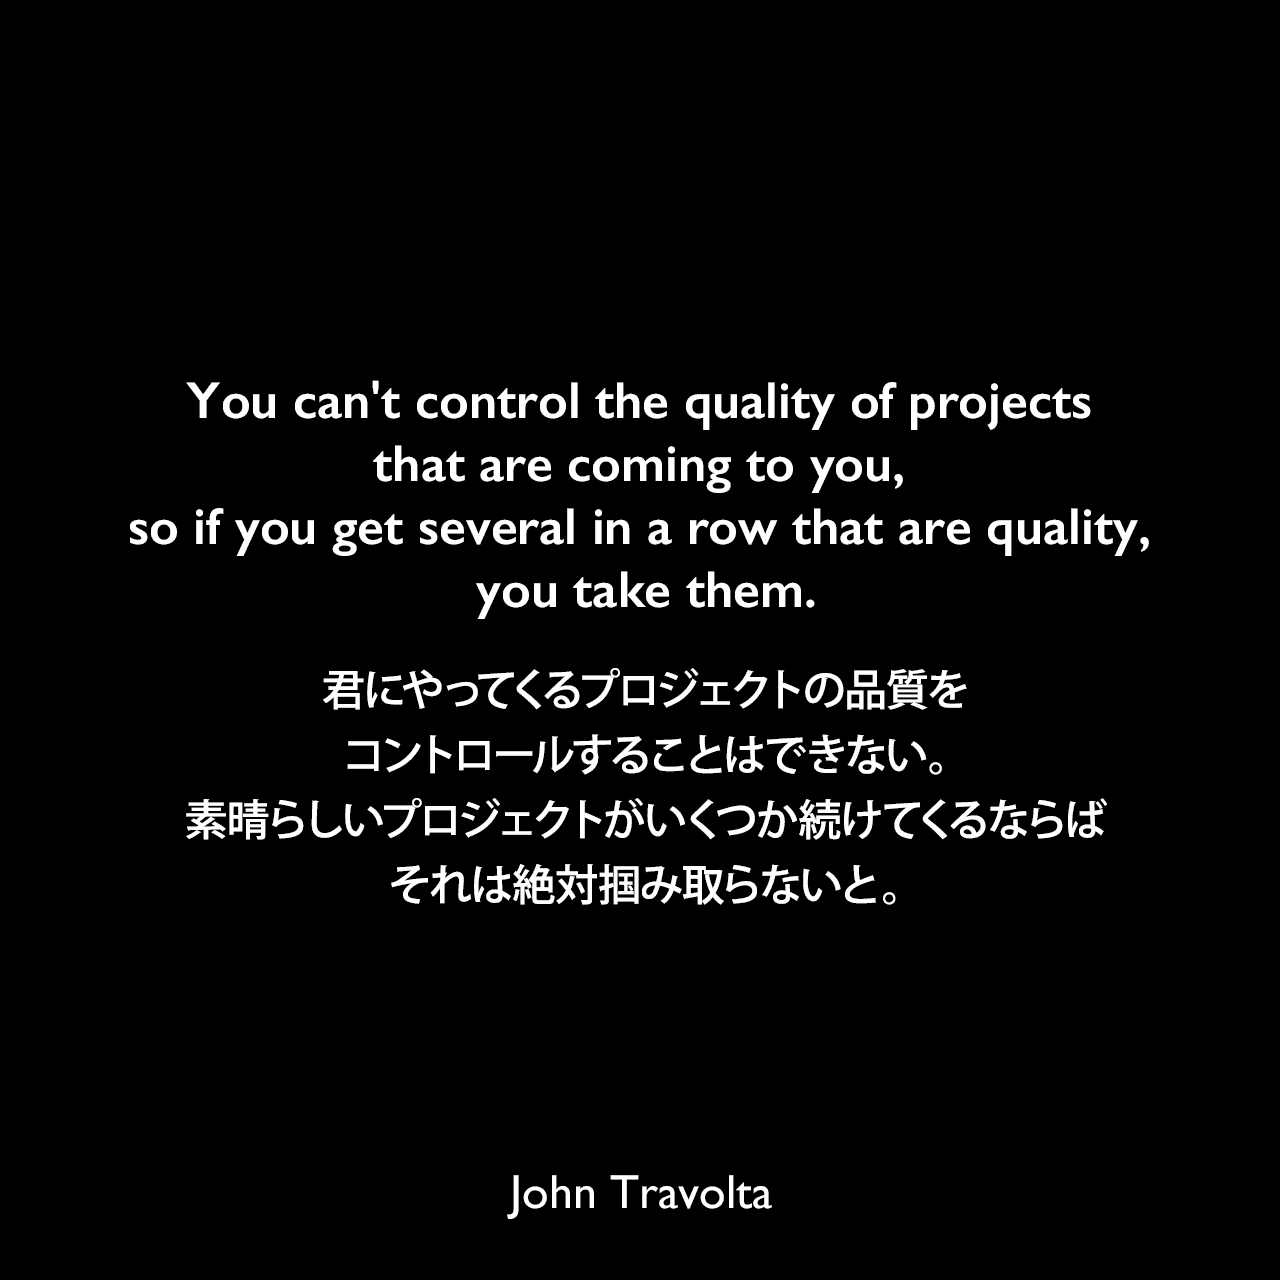 You can't control the quality of projects that are coming to you, so if you get several in a row that are quality, you take them.君にやってくるプロジェクトの品質をコントロールすることはできない。素晴らしいプロジェクトがいくつか続けてくるならば、それは絶対掴み取らないと。John Travolta